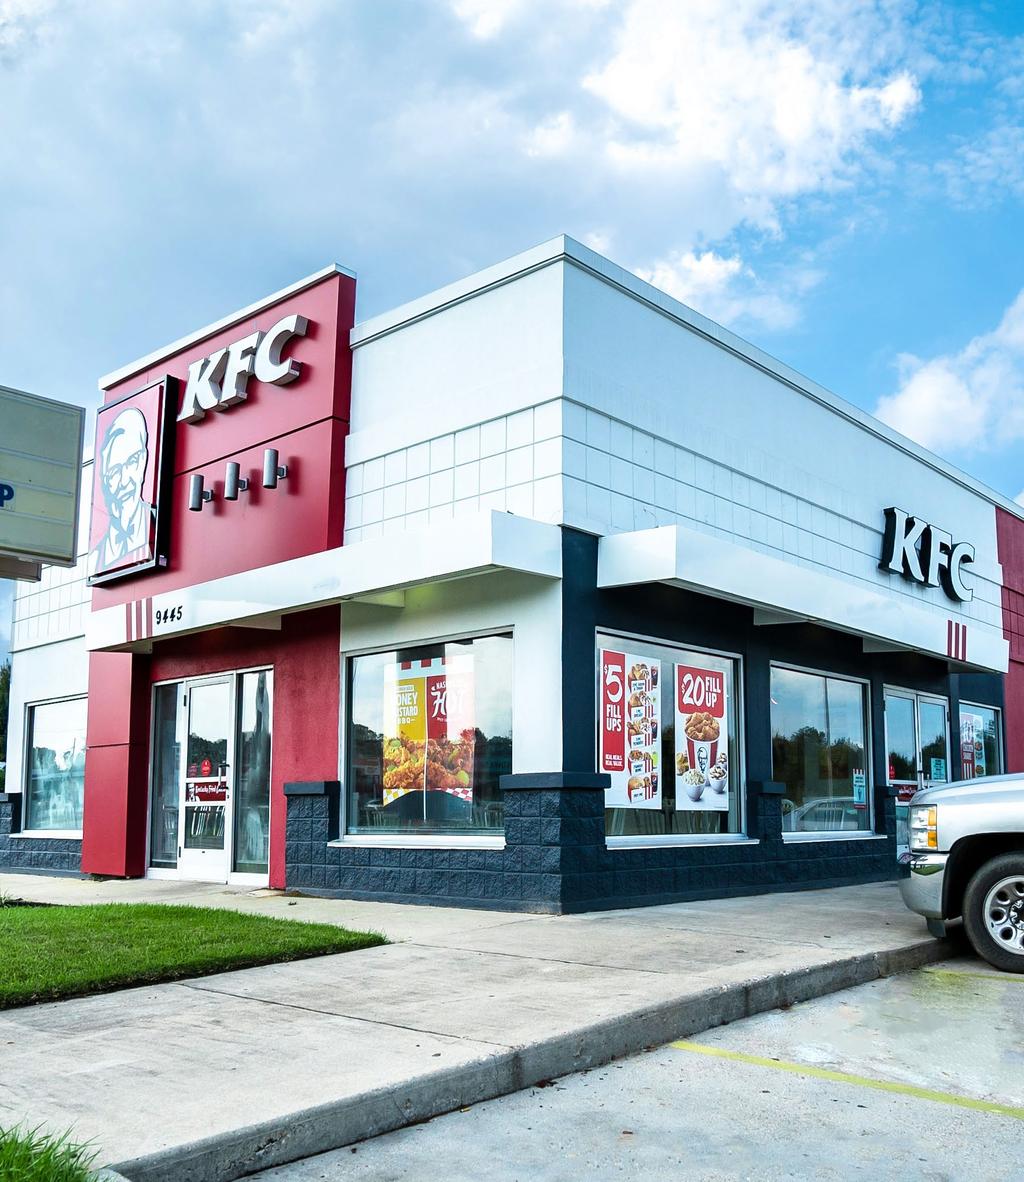 Tenant Overview - KFC TACO BELL KFC Corporation, based in Louisville, Kentucky, is one of the few brands in America that can boast a rich, decades-long history of success and innovation.